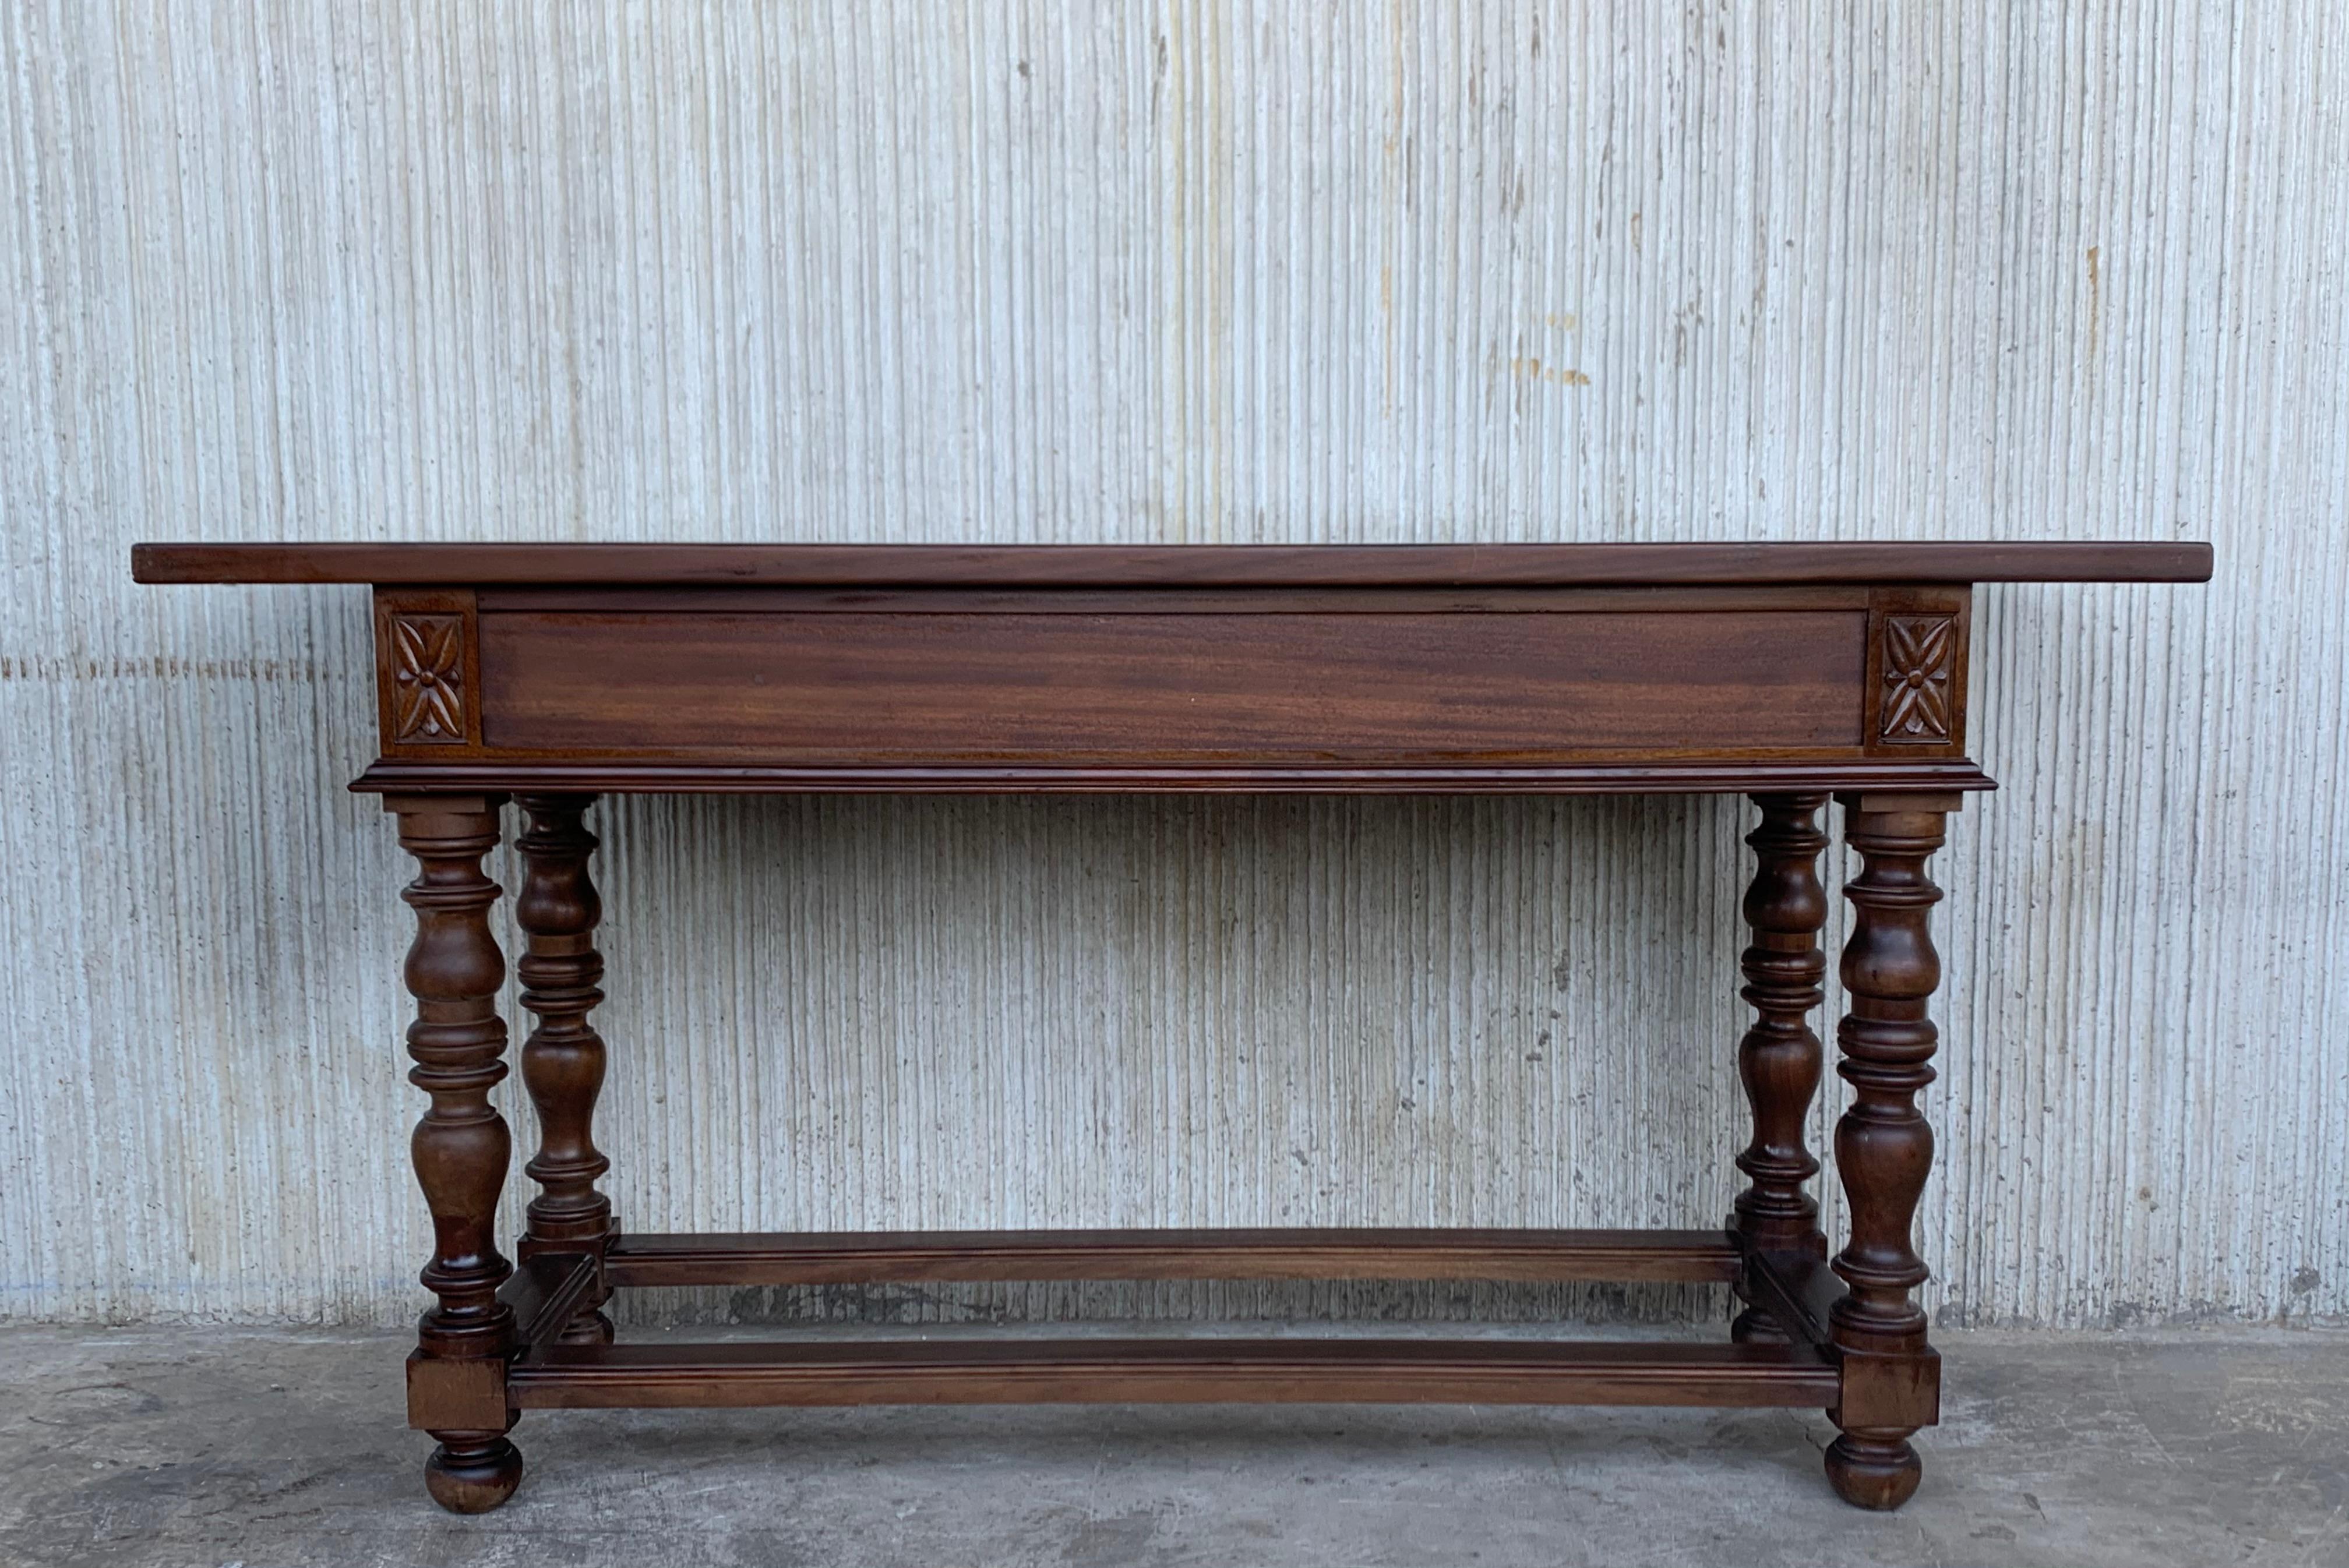 20th Century Spanish Tuscan Console Table with Two Drawers and Turned Legs 8